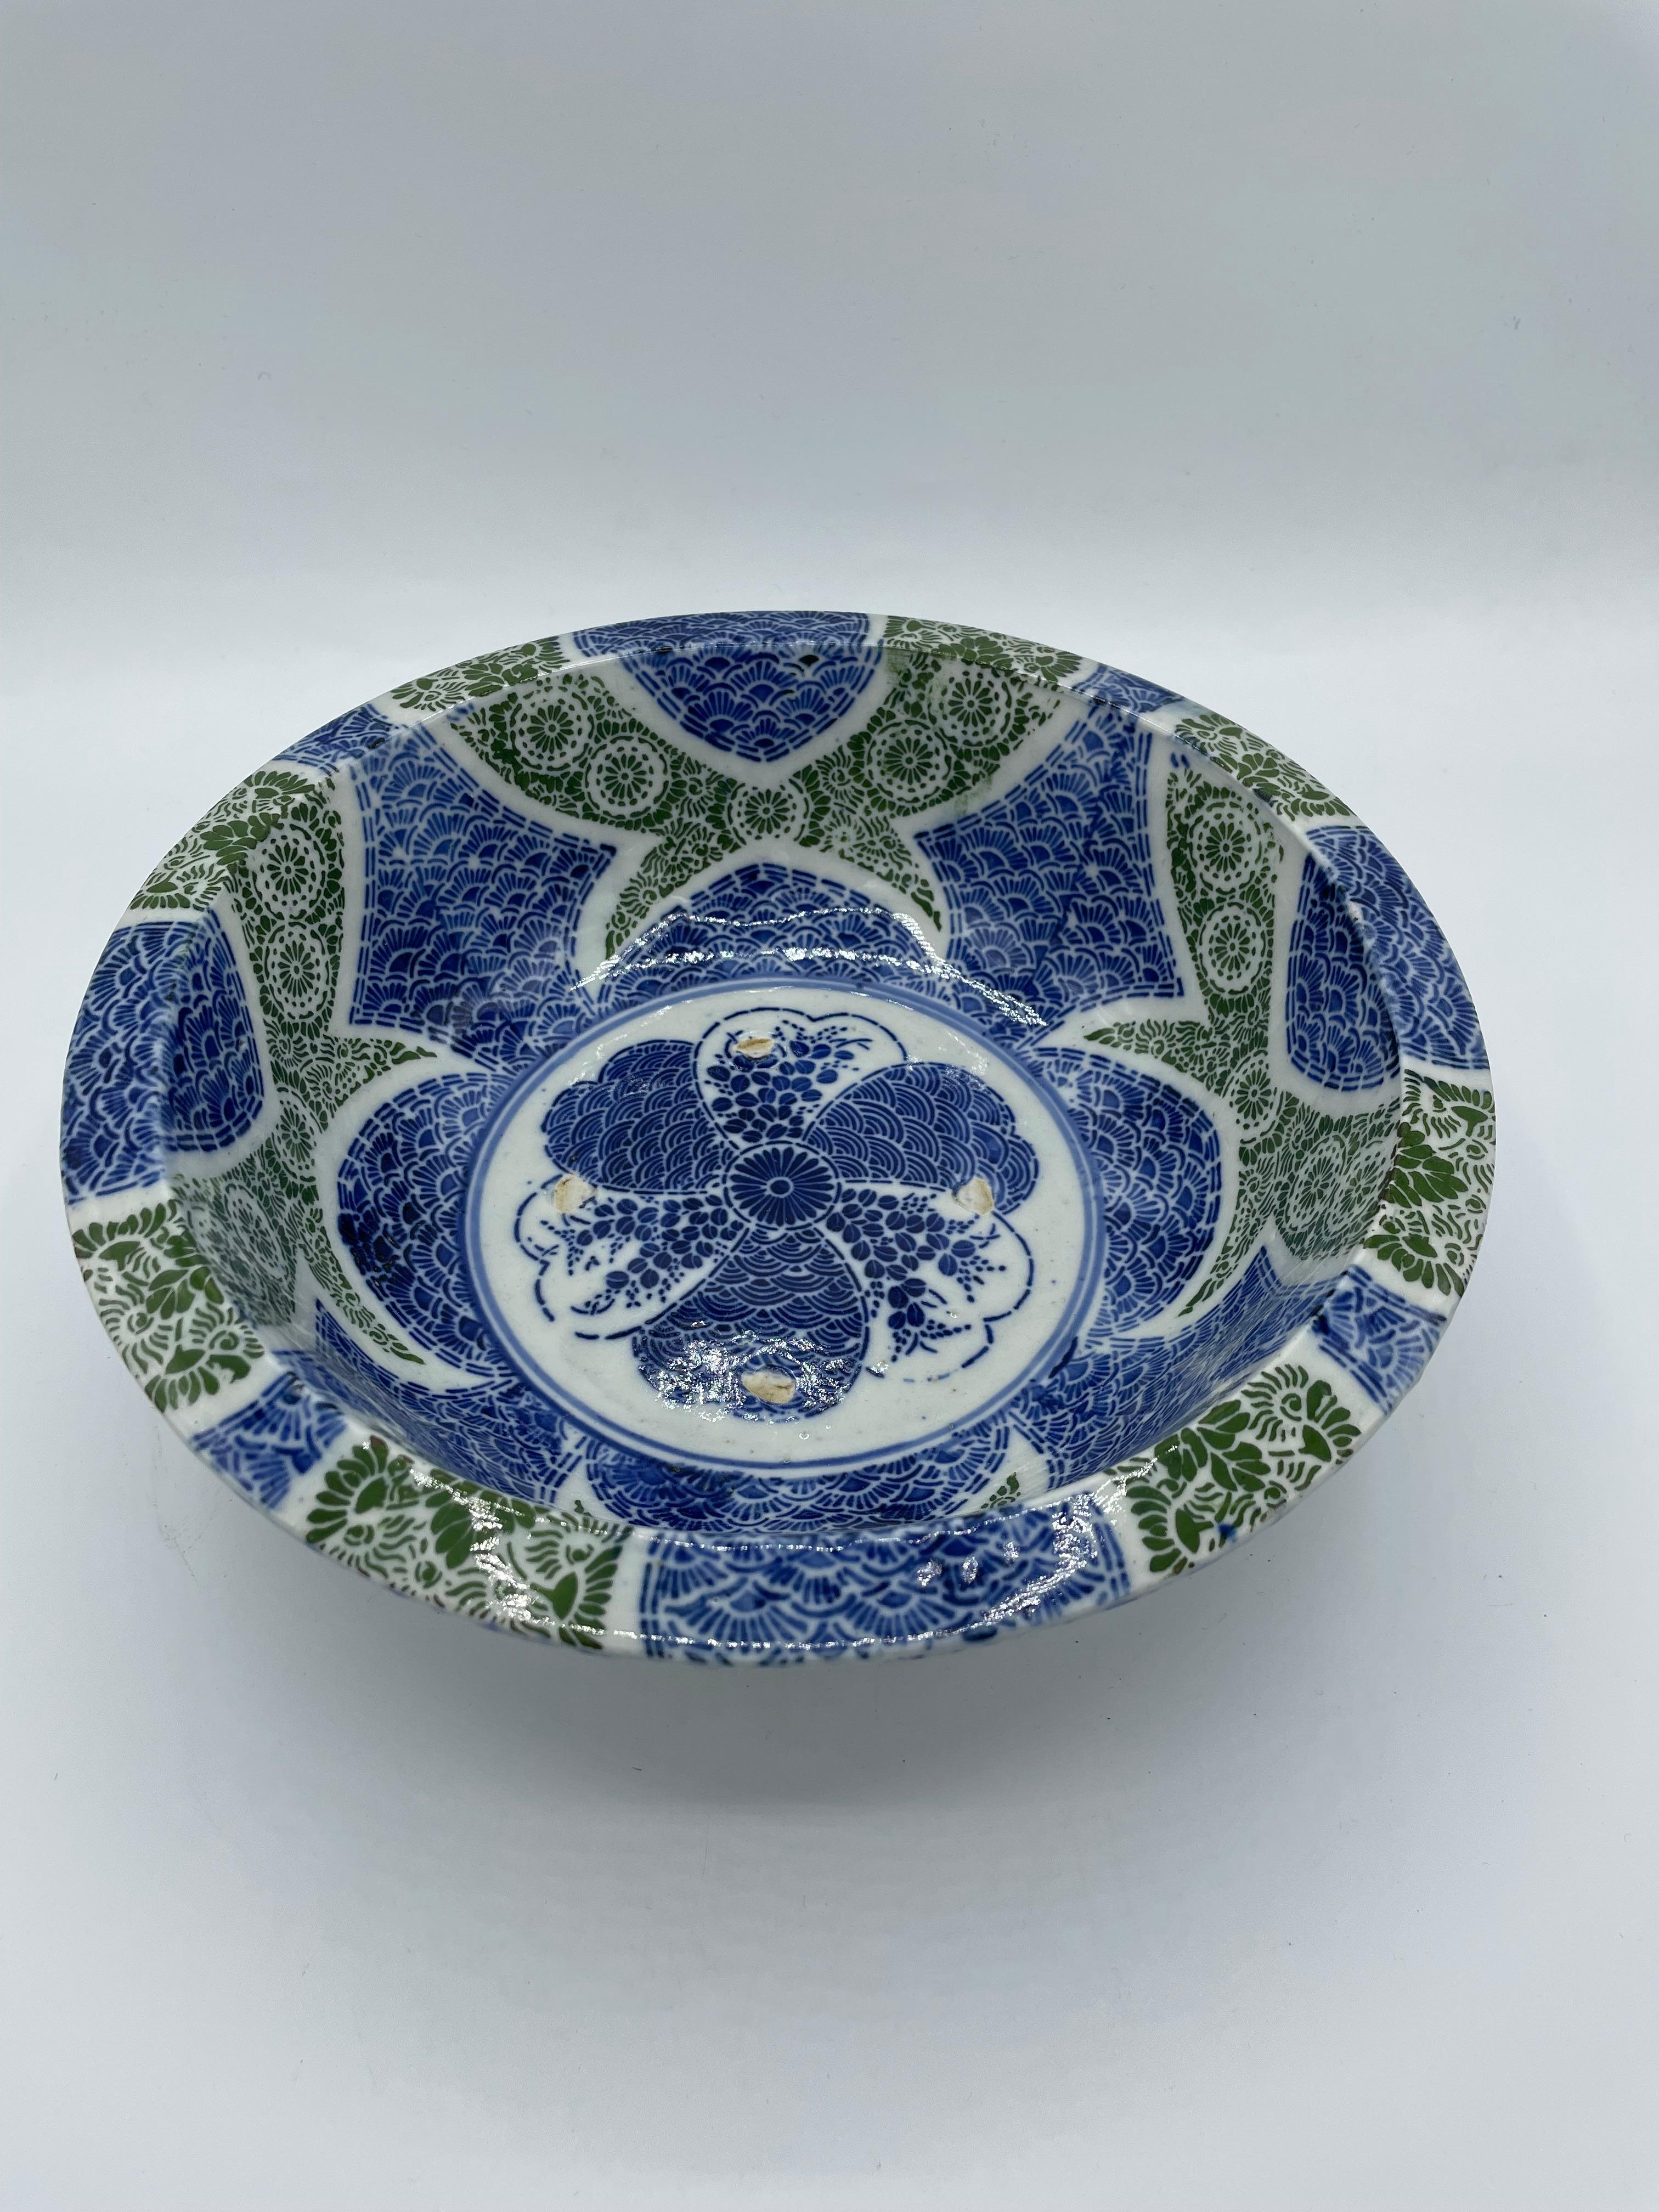 Porcelain Antique Japanese Blue and Green Serving Bowl 1920s Taisho era For Sale